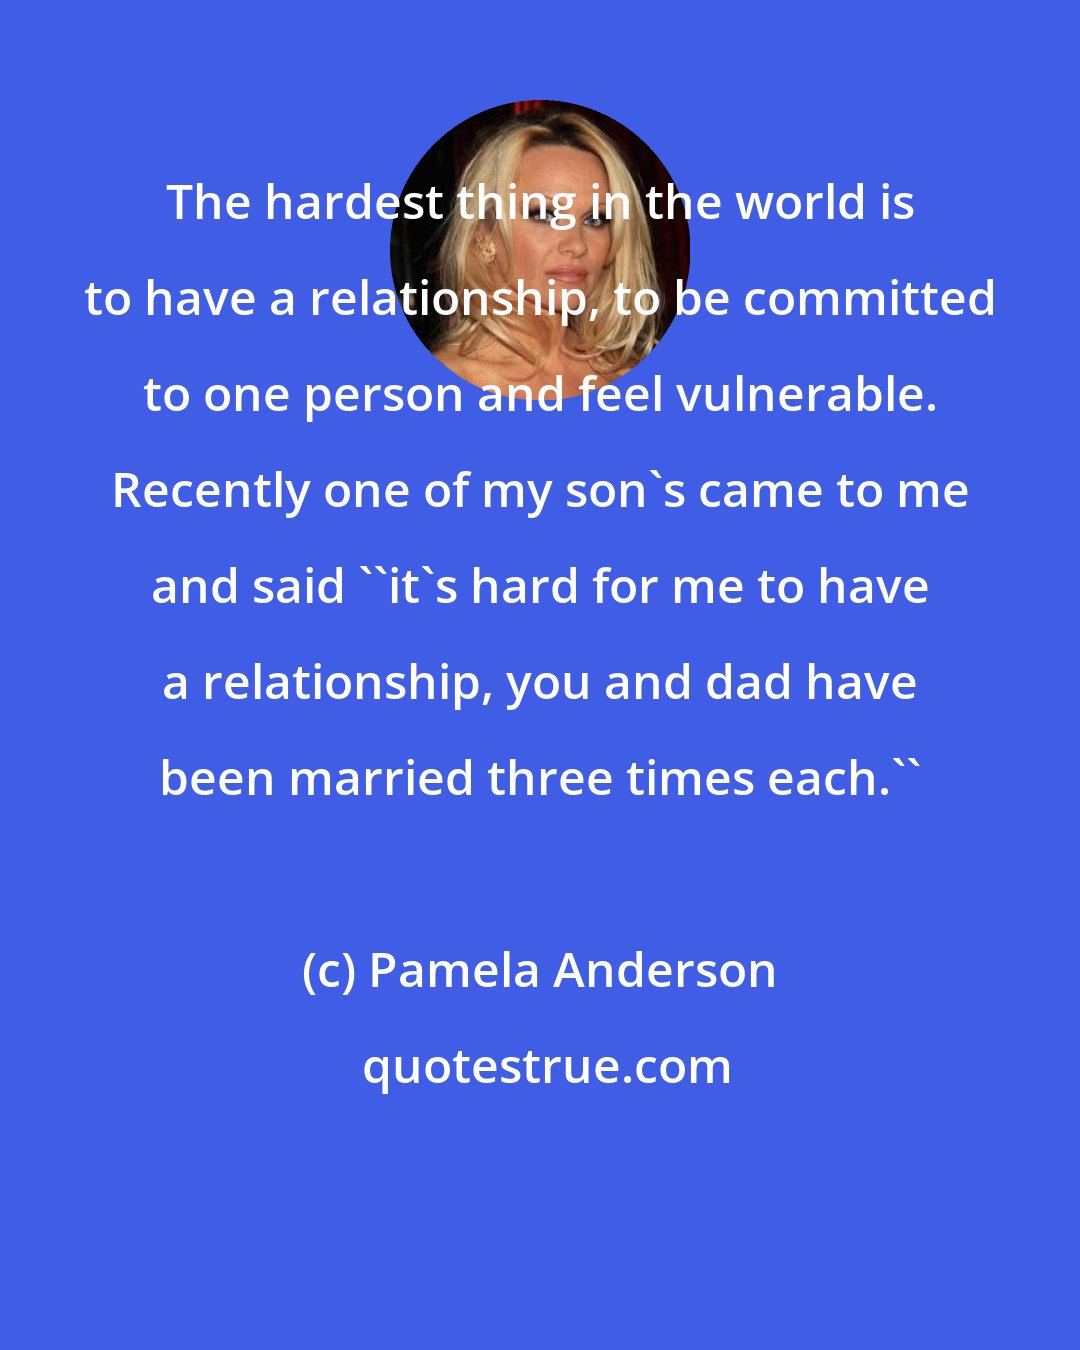 Pamela Anderson: The hardest thing in the world is to have a relationship, to be committed to one person and feel vulnerable. Recently one of my son's came to me and said ''it's hard for me to have a relationship, you and dad have been married three times each.''